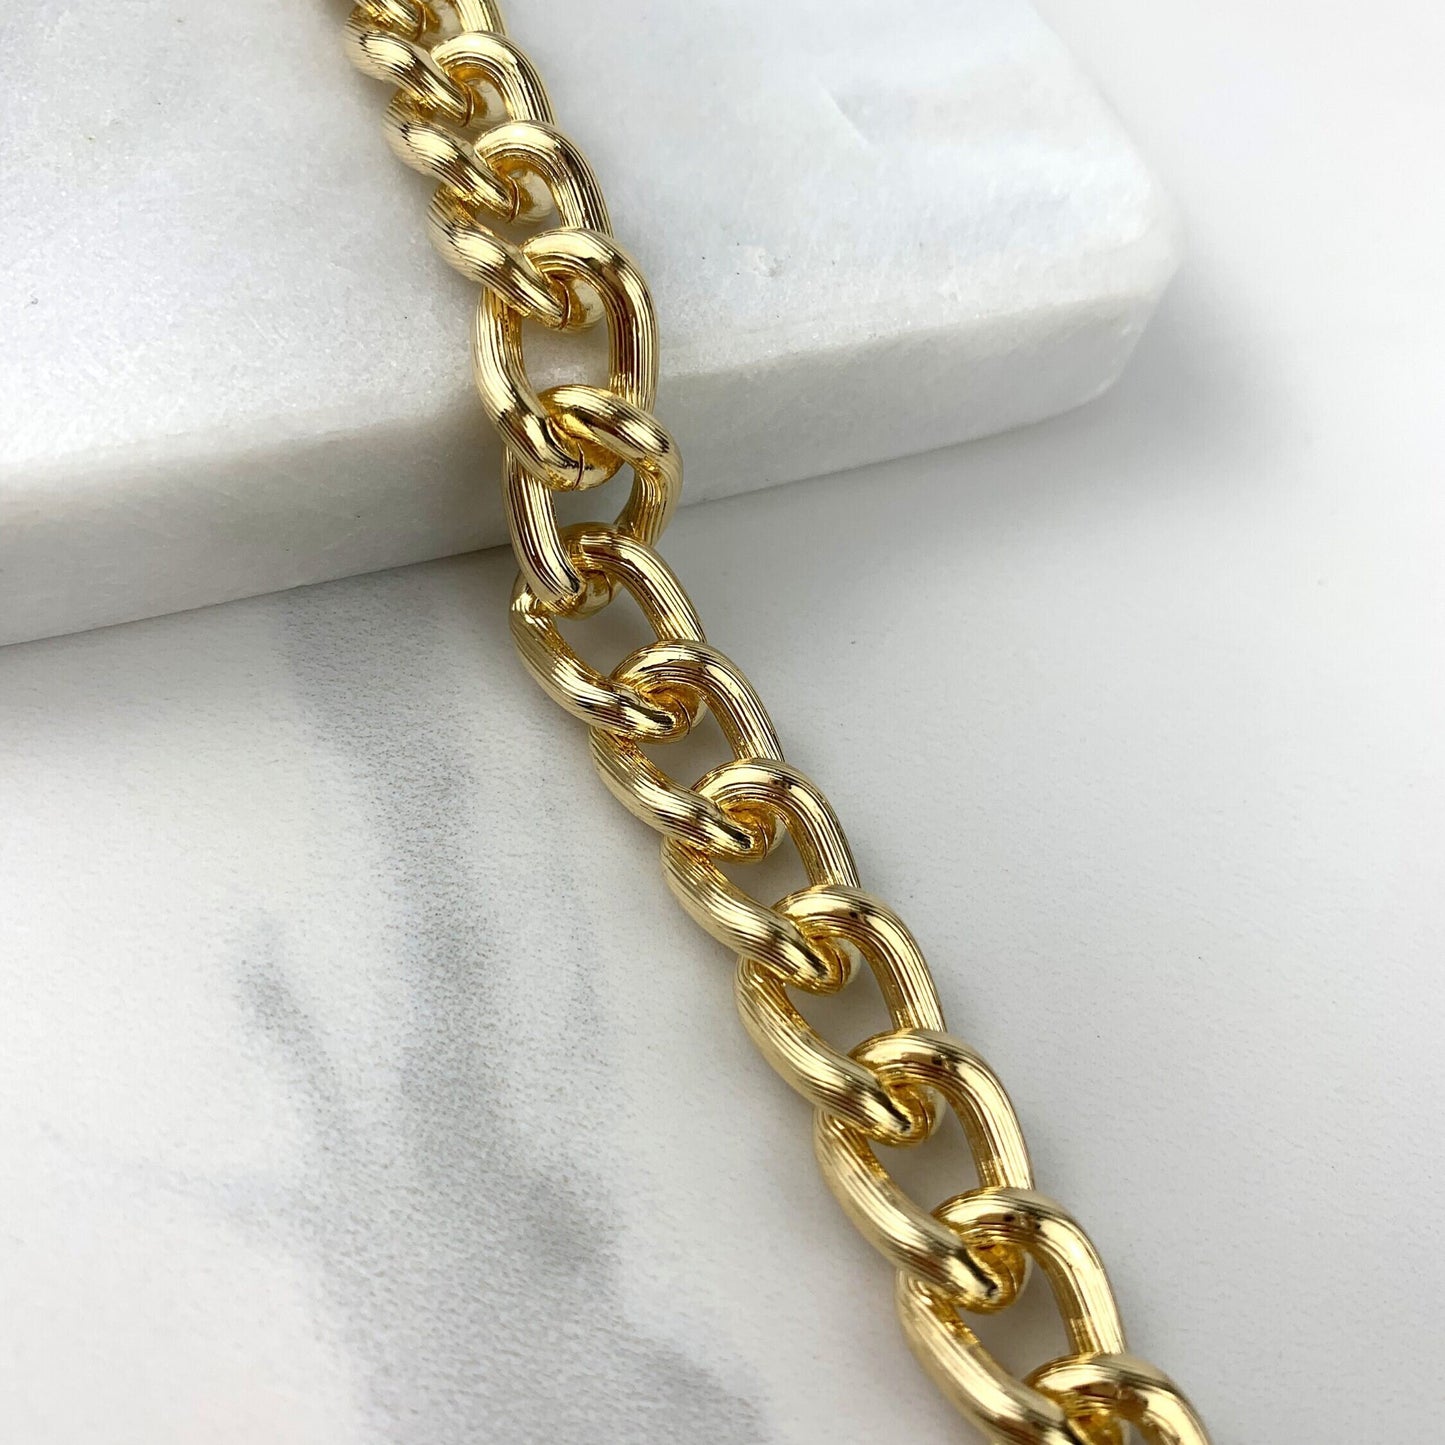 18k Gold Filled 11mm Curb Link, Cuban Link Shiny Lines Bracelet with Extender Wholesale Jewelry Supplies